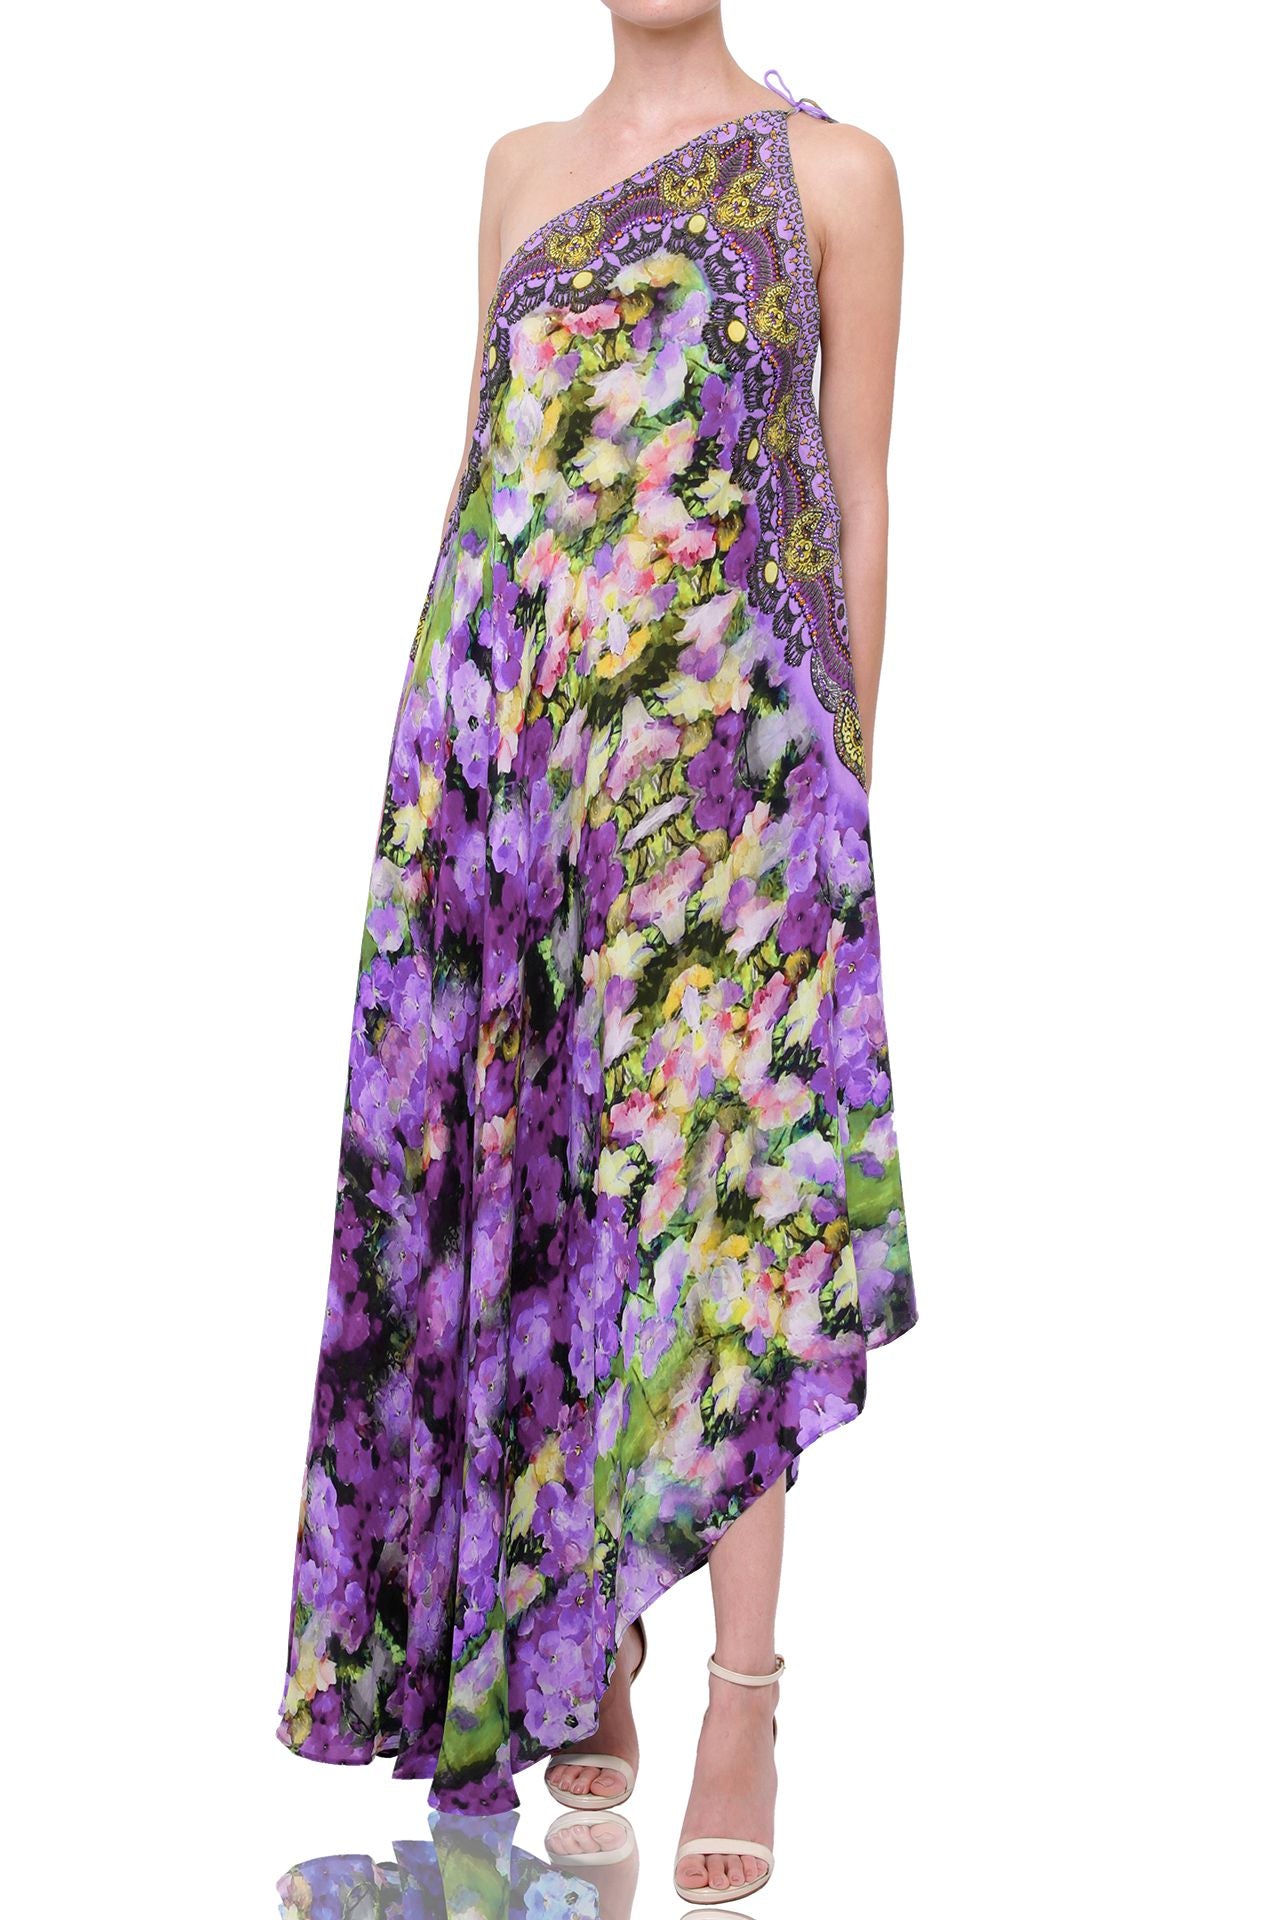 Floral Print 3 Way to Wear Maxi Dress in Purple